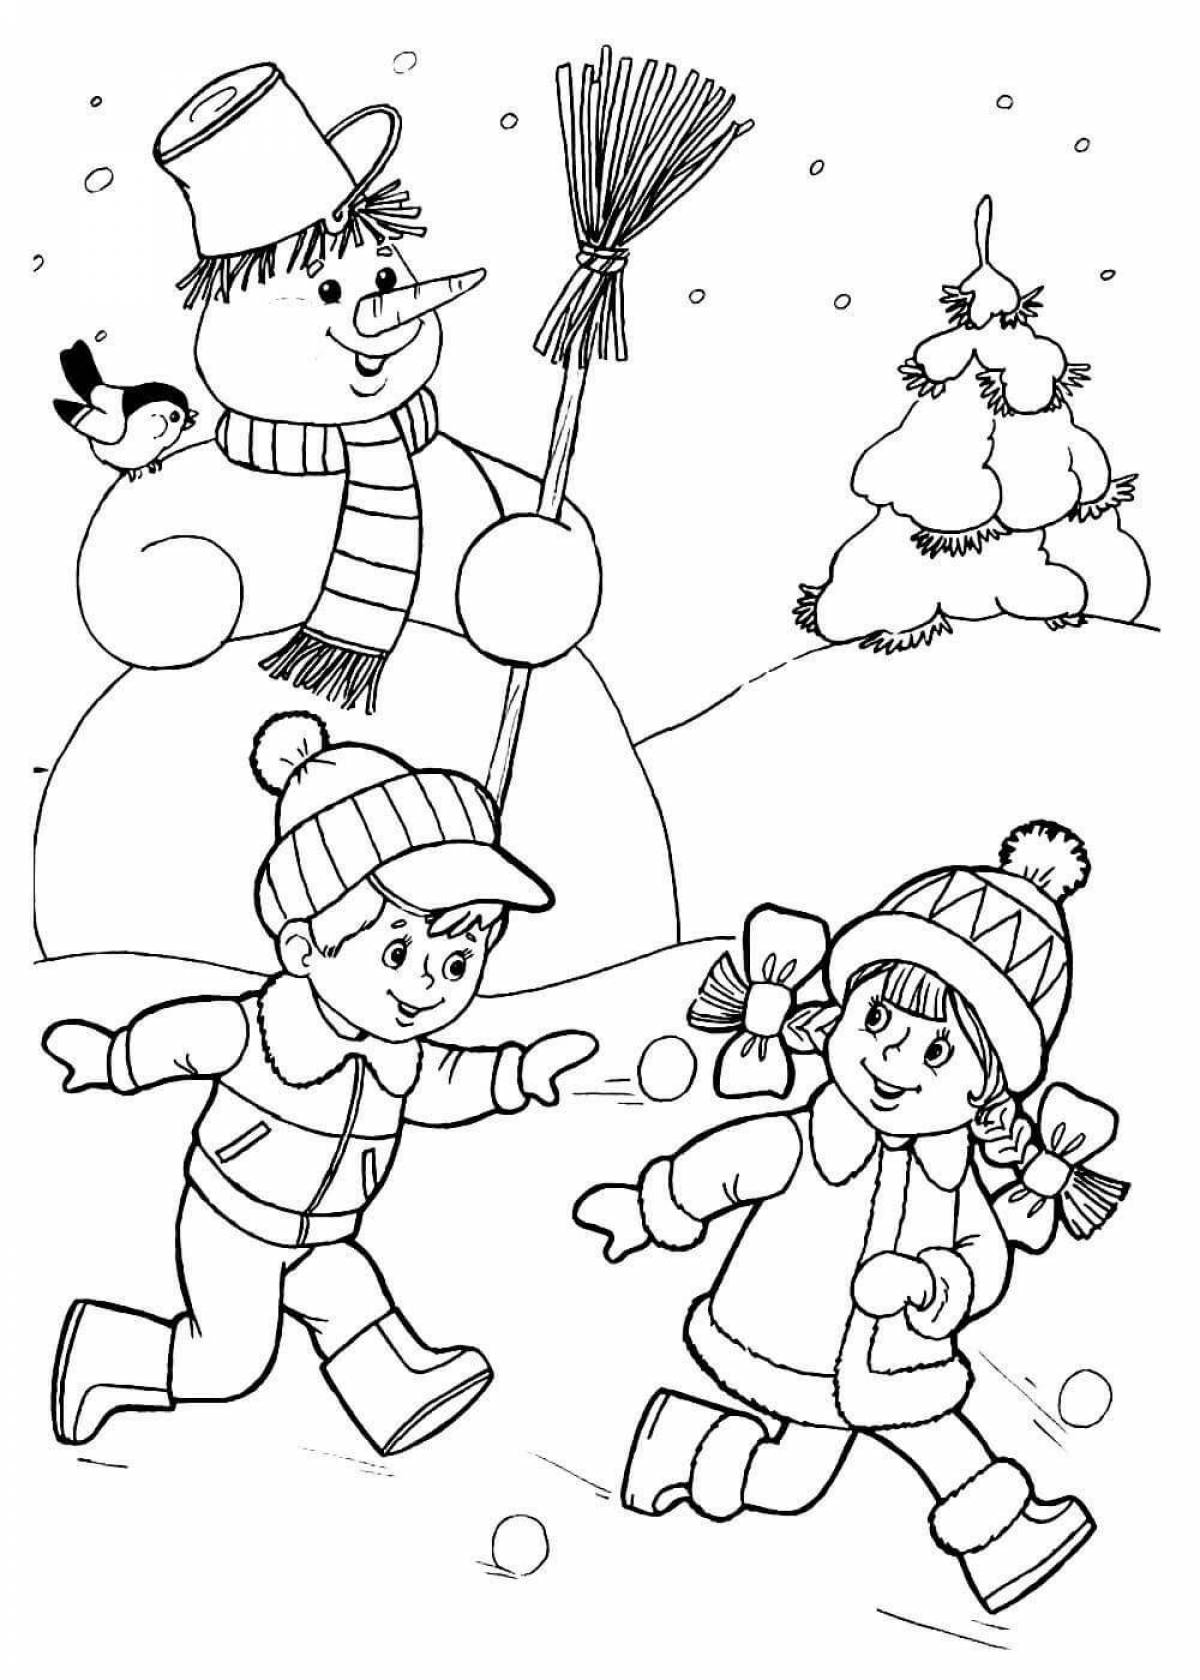 Whimsical winter holiday coloring book